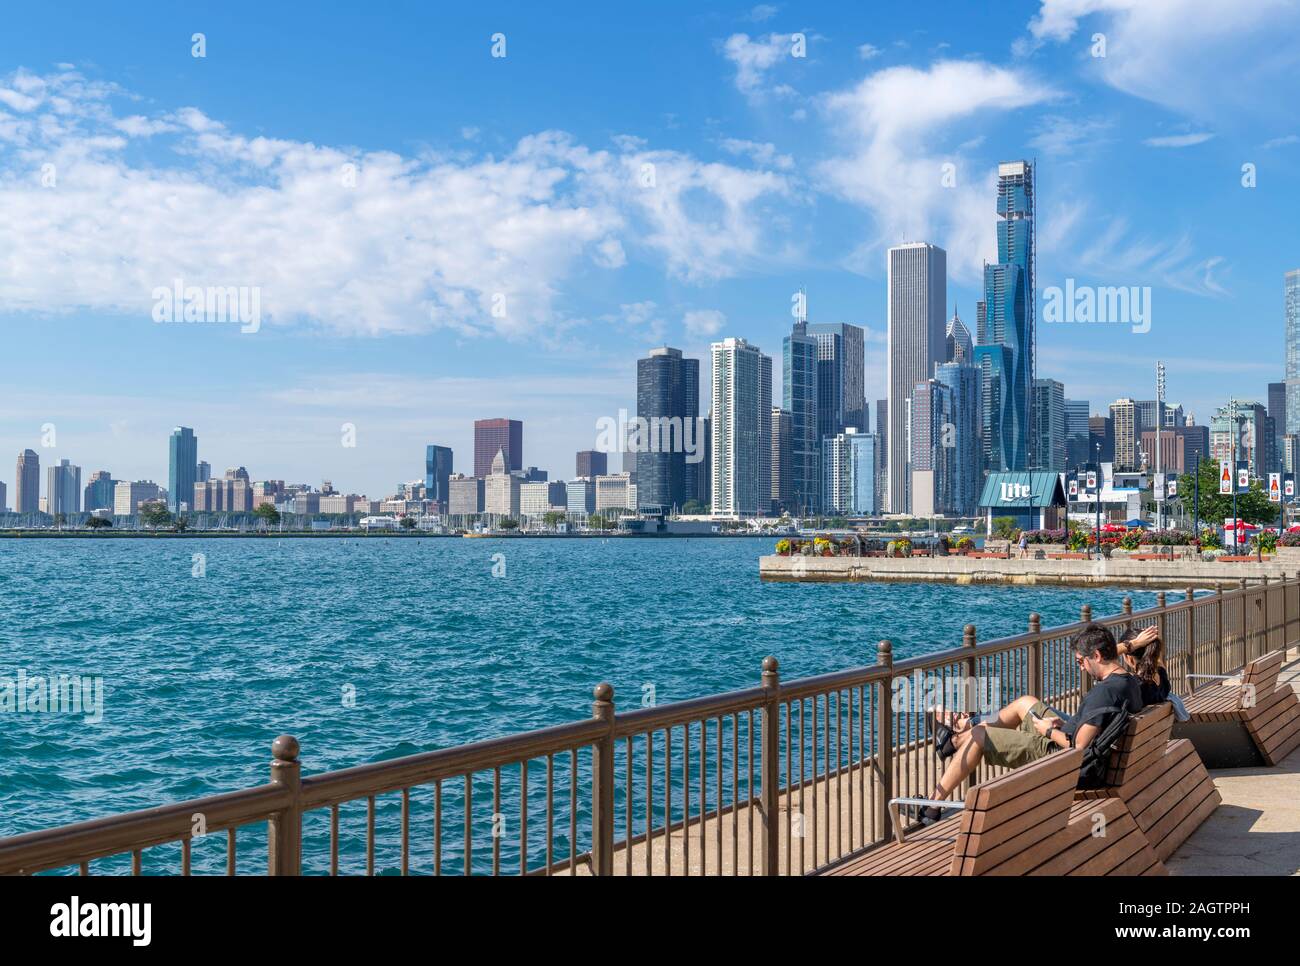 The Chicago skyline from Navy Pier, Chicago, Illinois, USA. Stock Photo